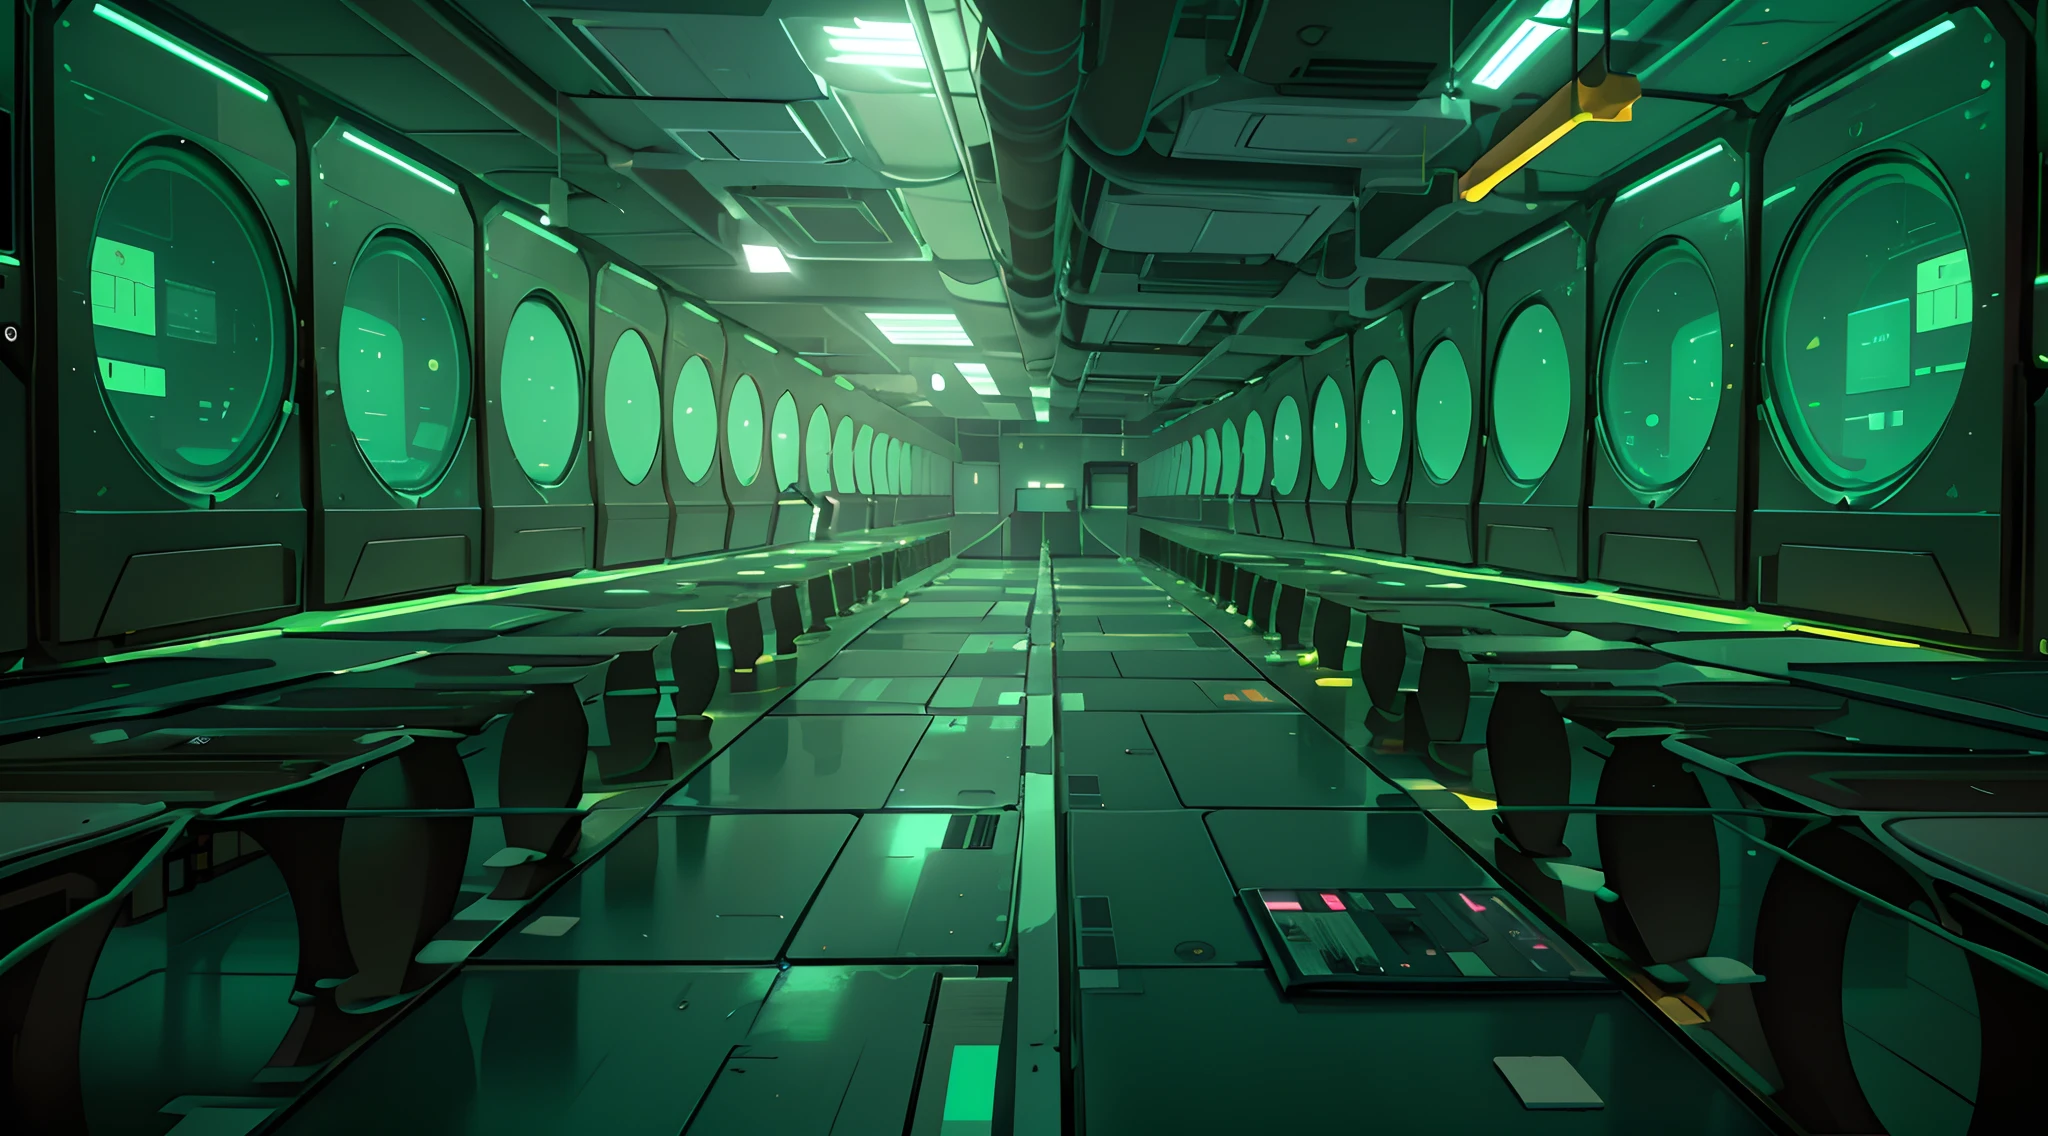 A dimly lit corridor，There are rows of data and computer screens，background is data server room，Hacking mainframes，cyber space，in realistic data center，3840x2160，3840 x 2160，Spaceship corridor background，Network architecture，surreal cyberspace，in detailed data center  ，green colored theme